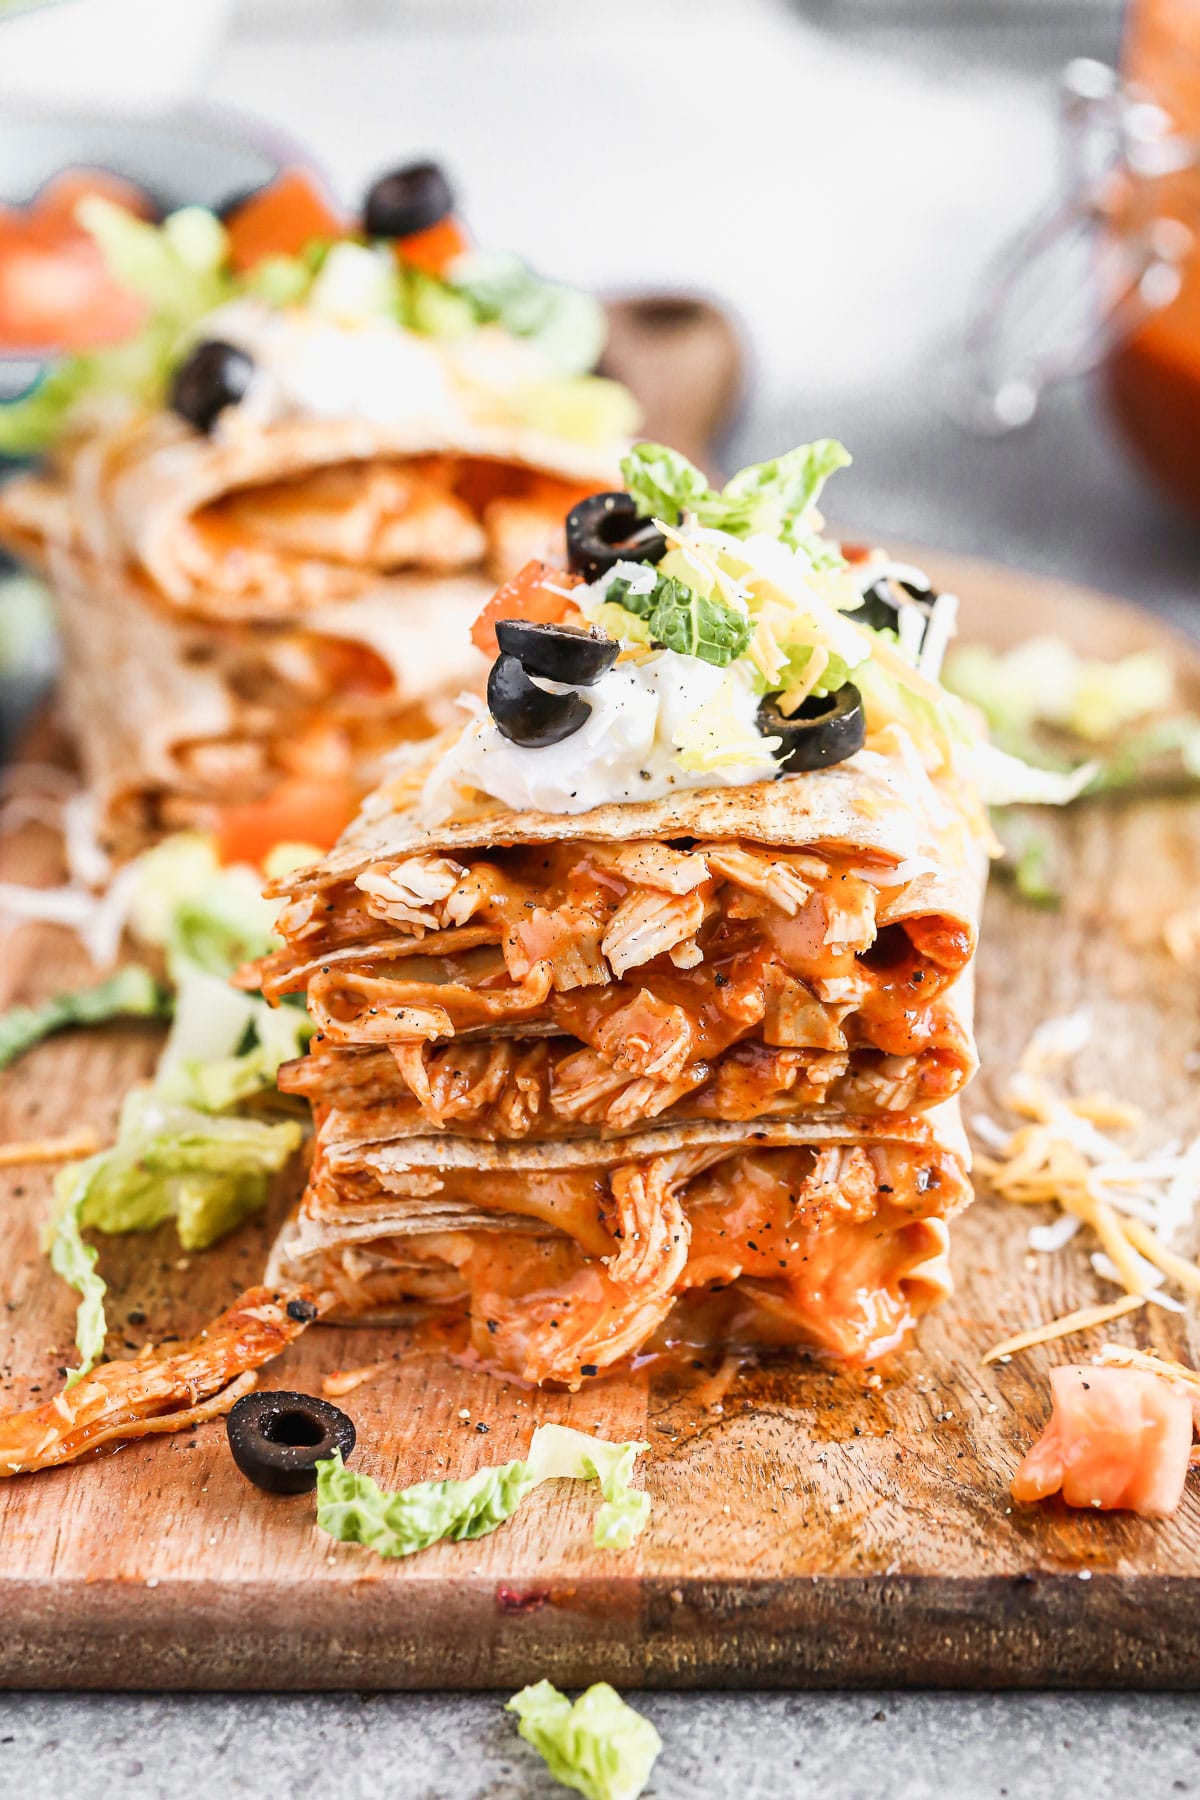 Chicken enchilada on the inside, taco on the outside is what makes our Chicken Enchilada Taco Quesadillas the perfect handheld hybrid of three classic tex-mex dishes. Each whole-wheat tortilla is filled with saucy shredded chicken (made with our epic homemade enchilada sauce) and cheese, pan-fried and then smothered with all your favorite taco fixings! 